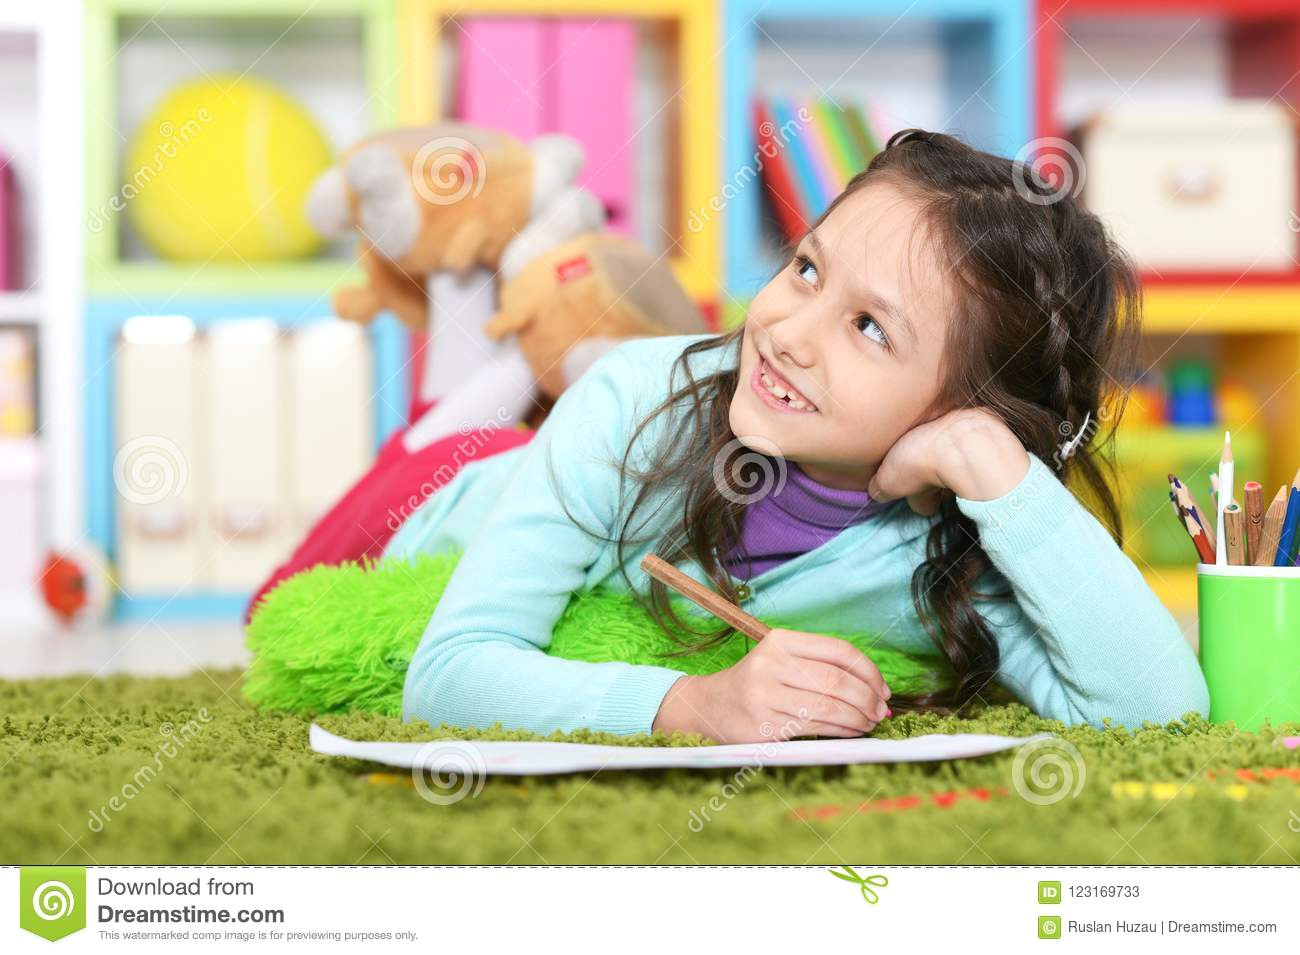 Drawing Of A Girl Lying On the Floor Cute Little Girl Drawing while Lying Stock Image Image Of Paper